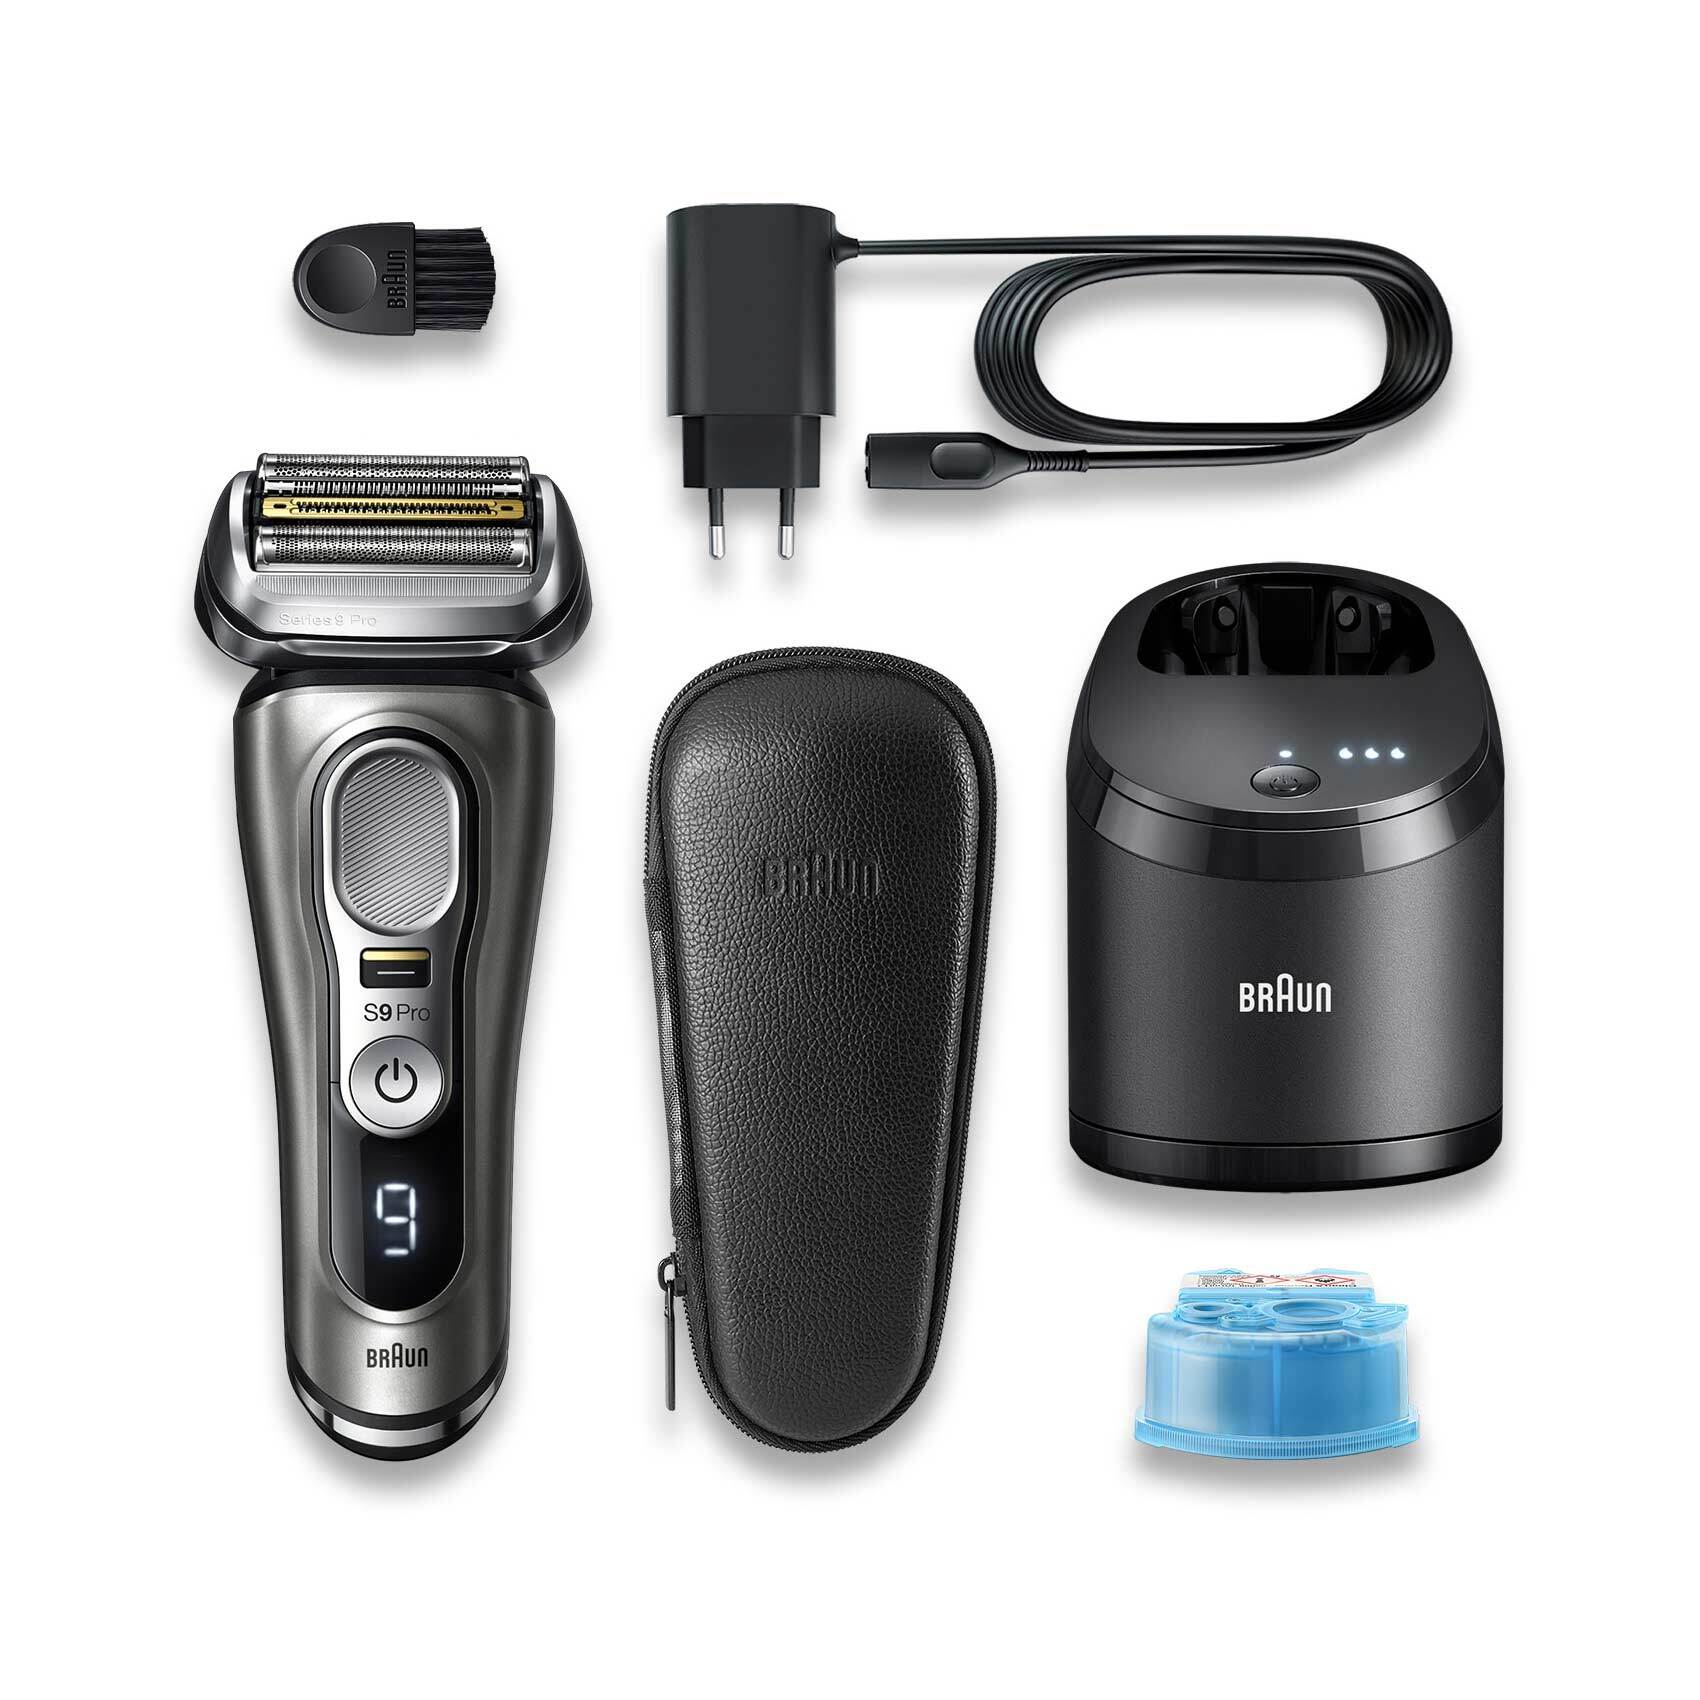 Series 7 71-S7500cc Wet & Dry shaver with SmartCare center and 1